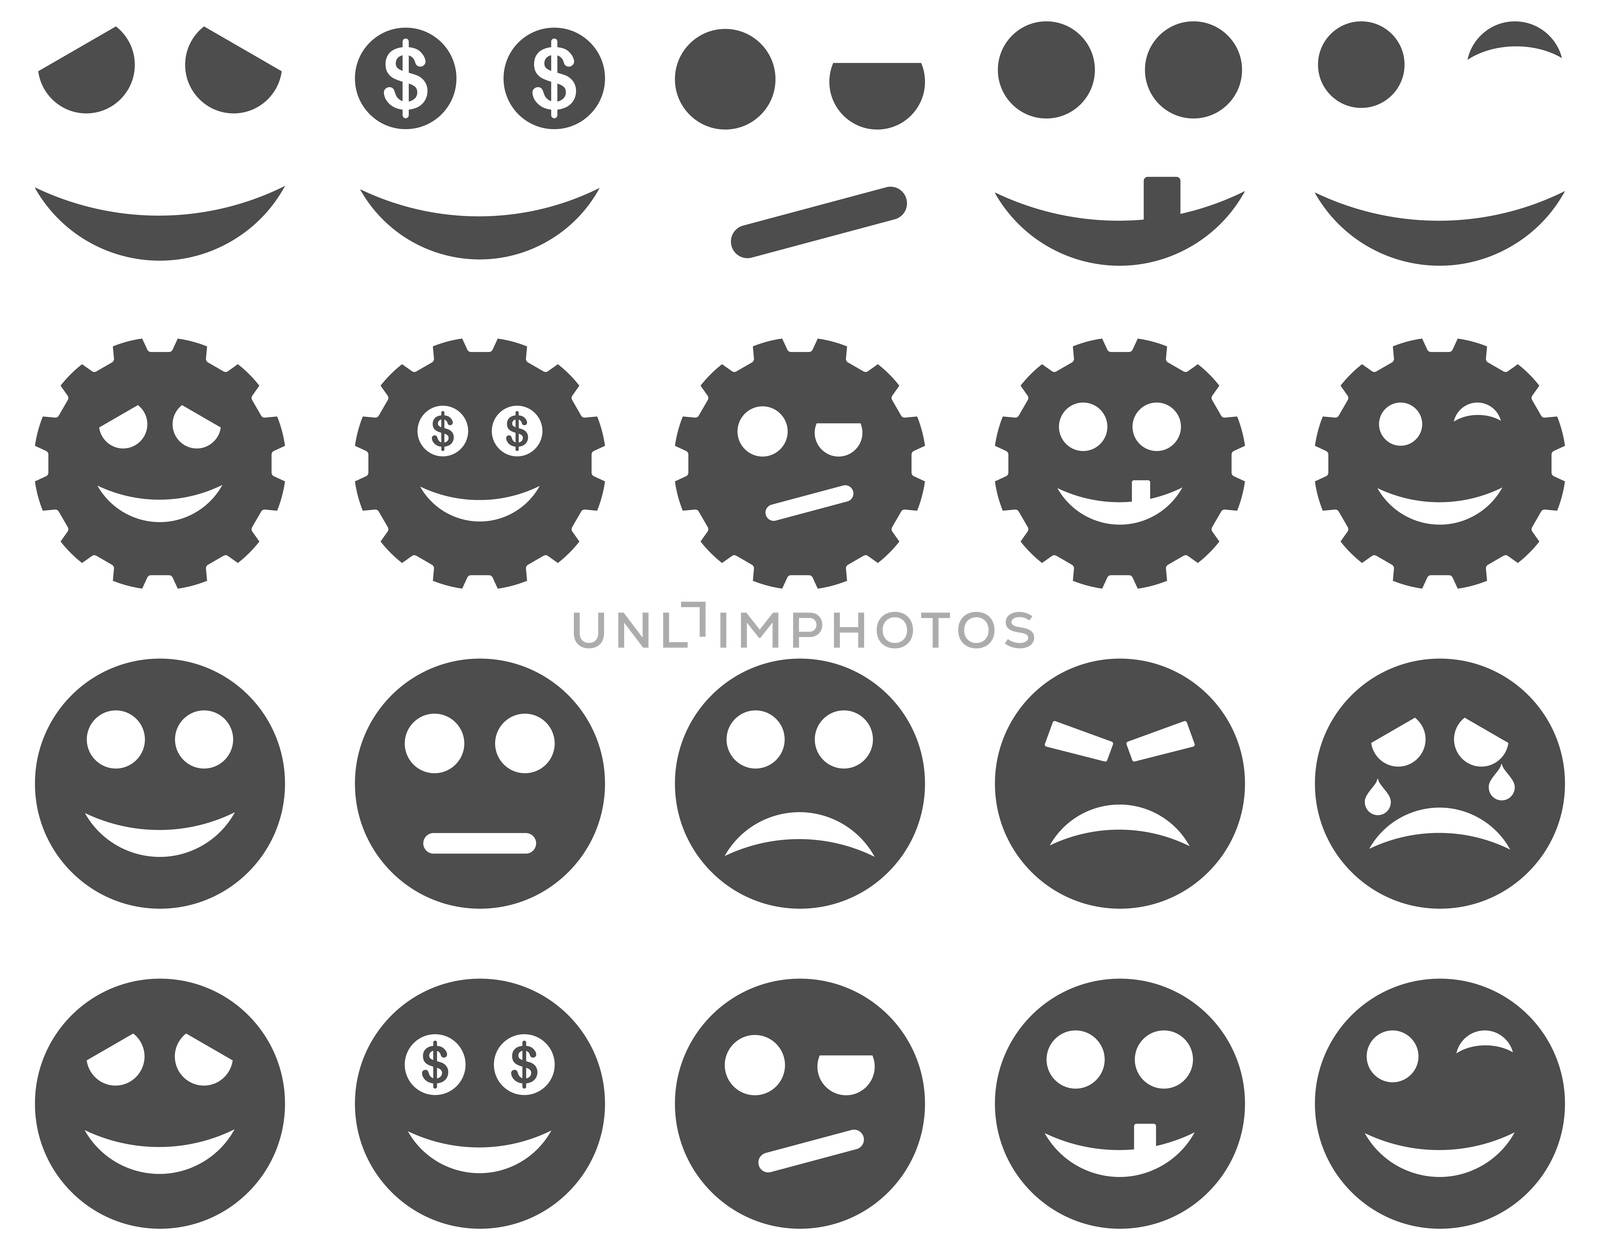 Tools, gears, smiles, emoticons icons. Glyph set style is flat images, gray symbols, isolated on a white background.